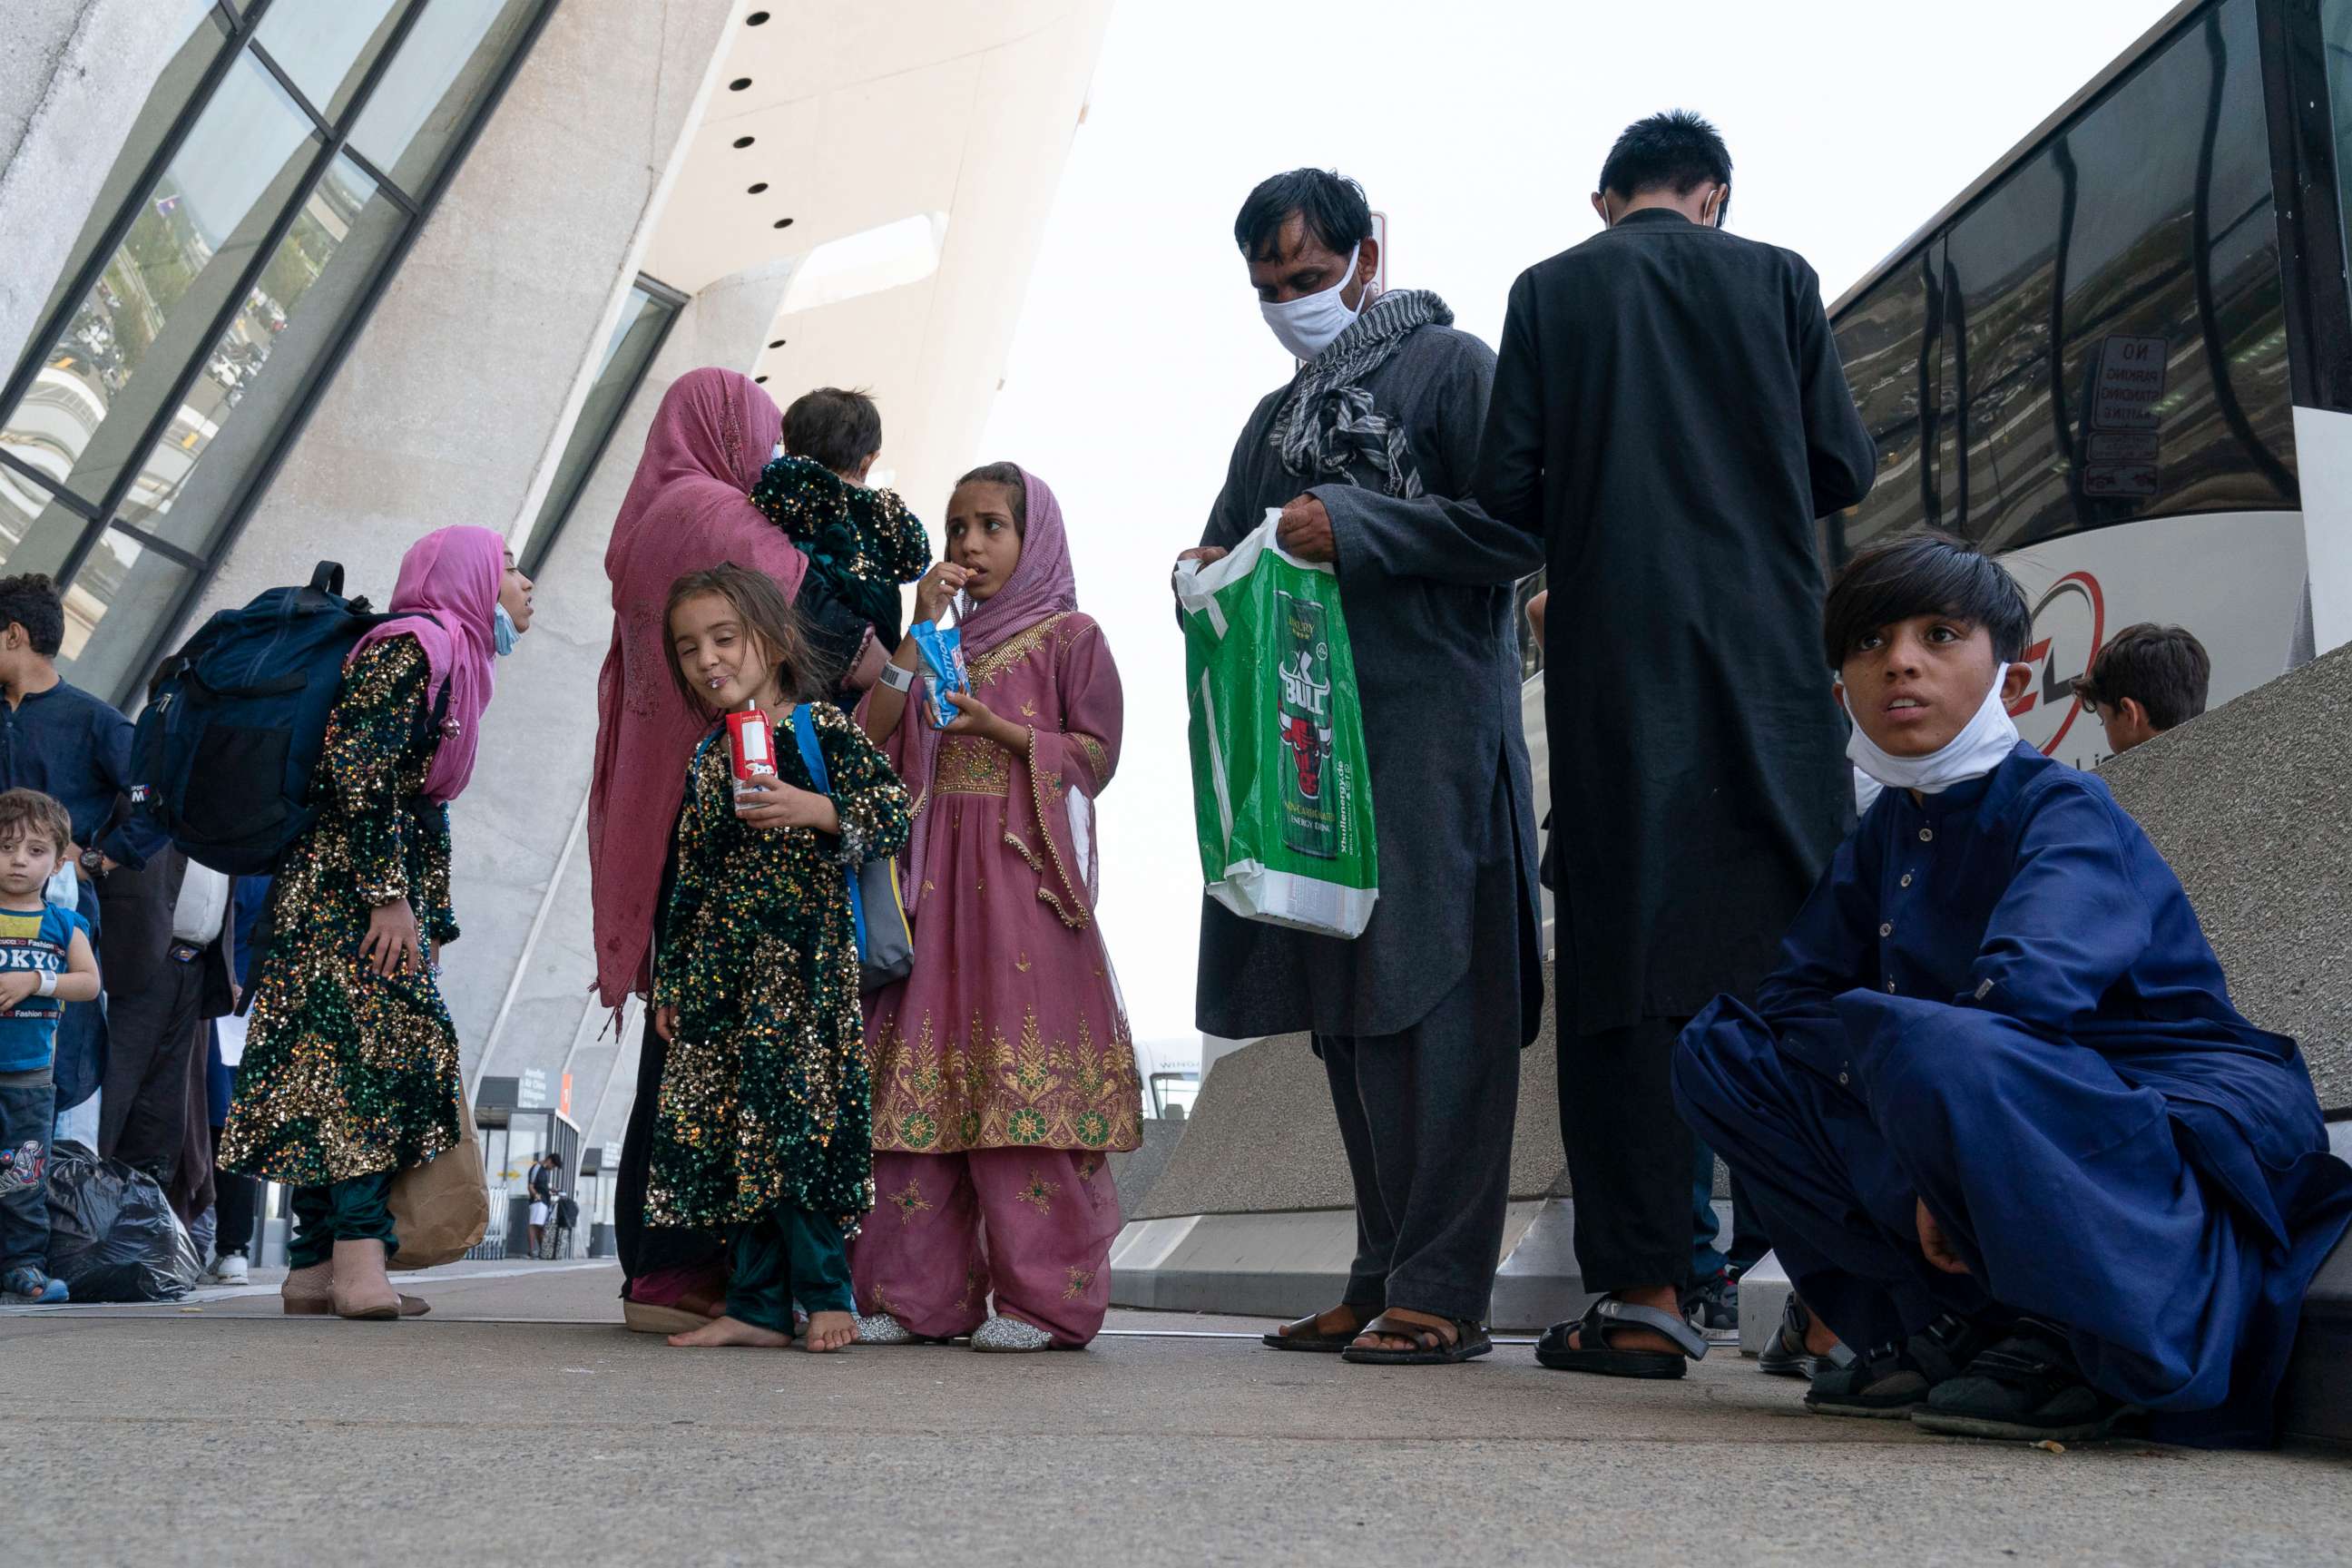 PHOTO: Families evacuated from Kabul, Afghanistan, wait outside the terminal to board a bus after they arrived at Washington Dulles International Airport, in Chantilly, Va., Aug. 24, 2021.